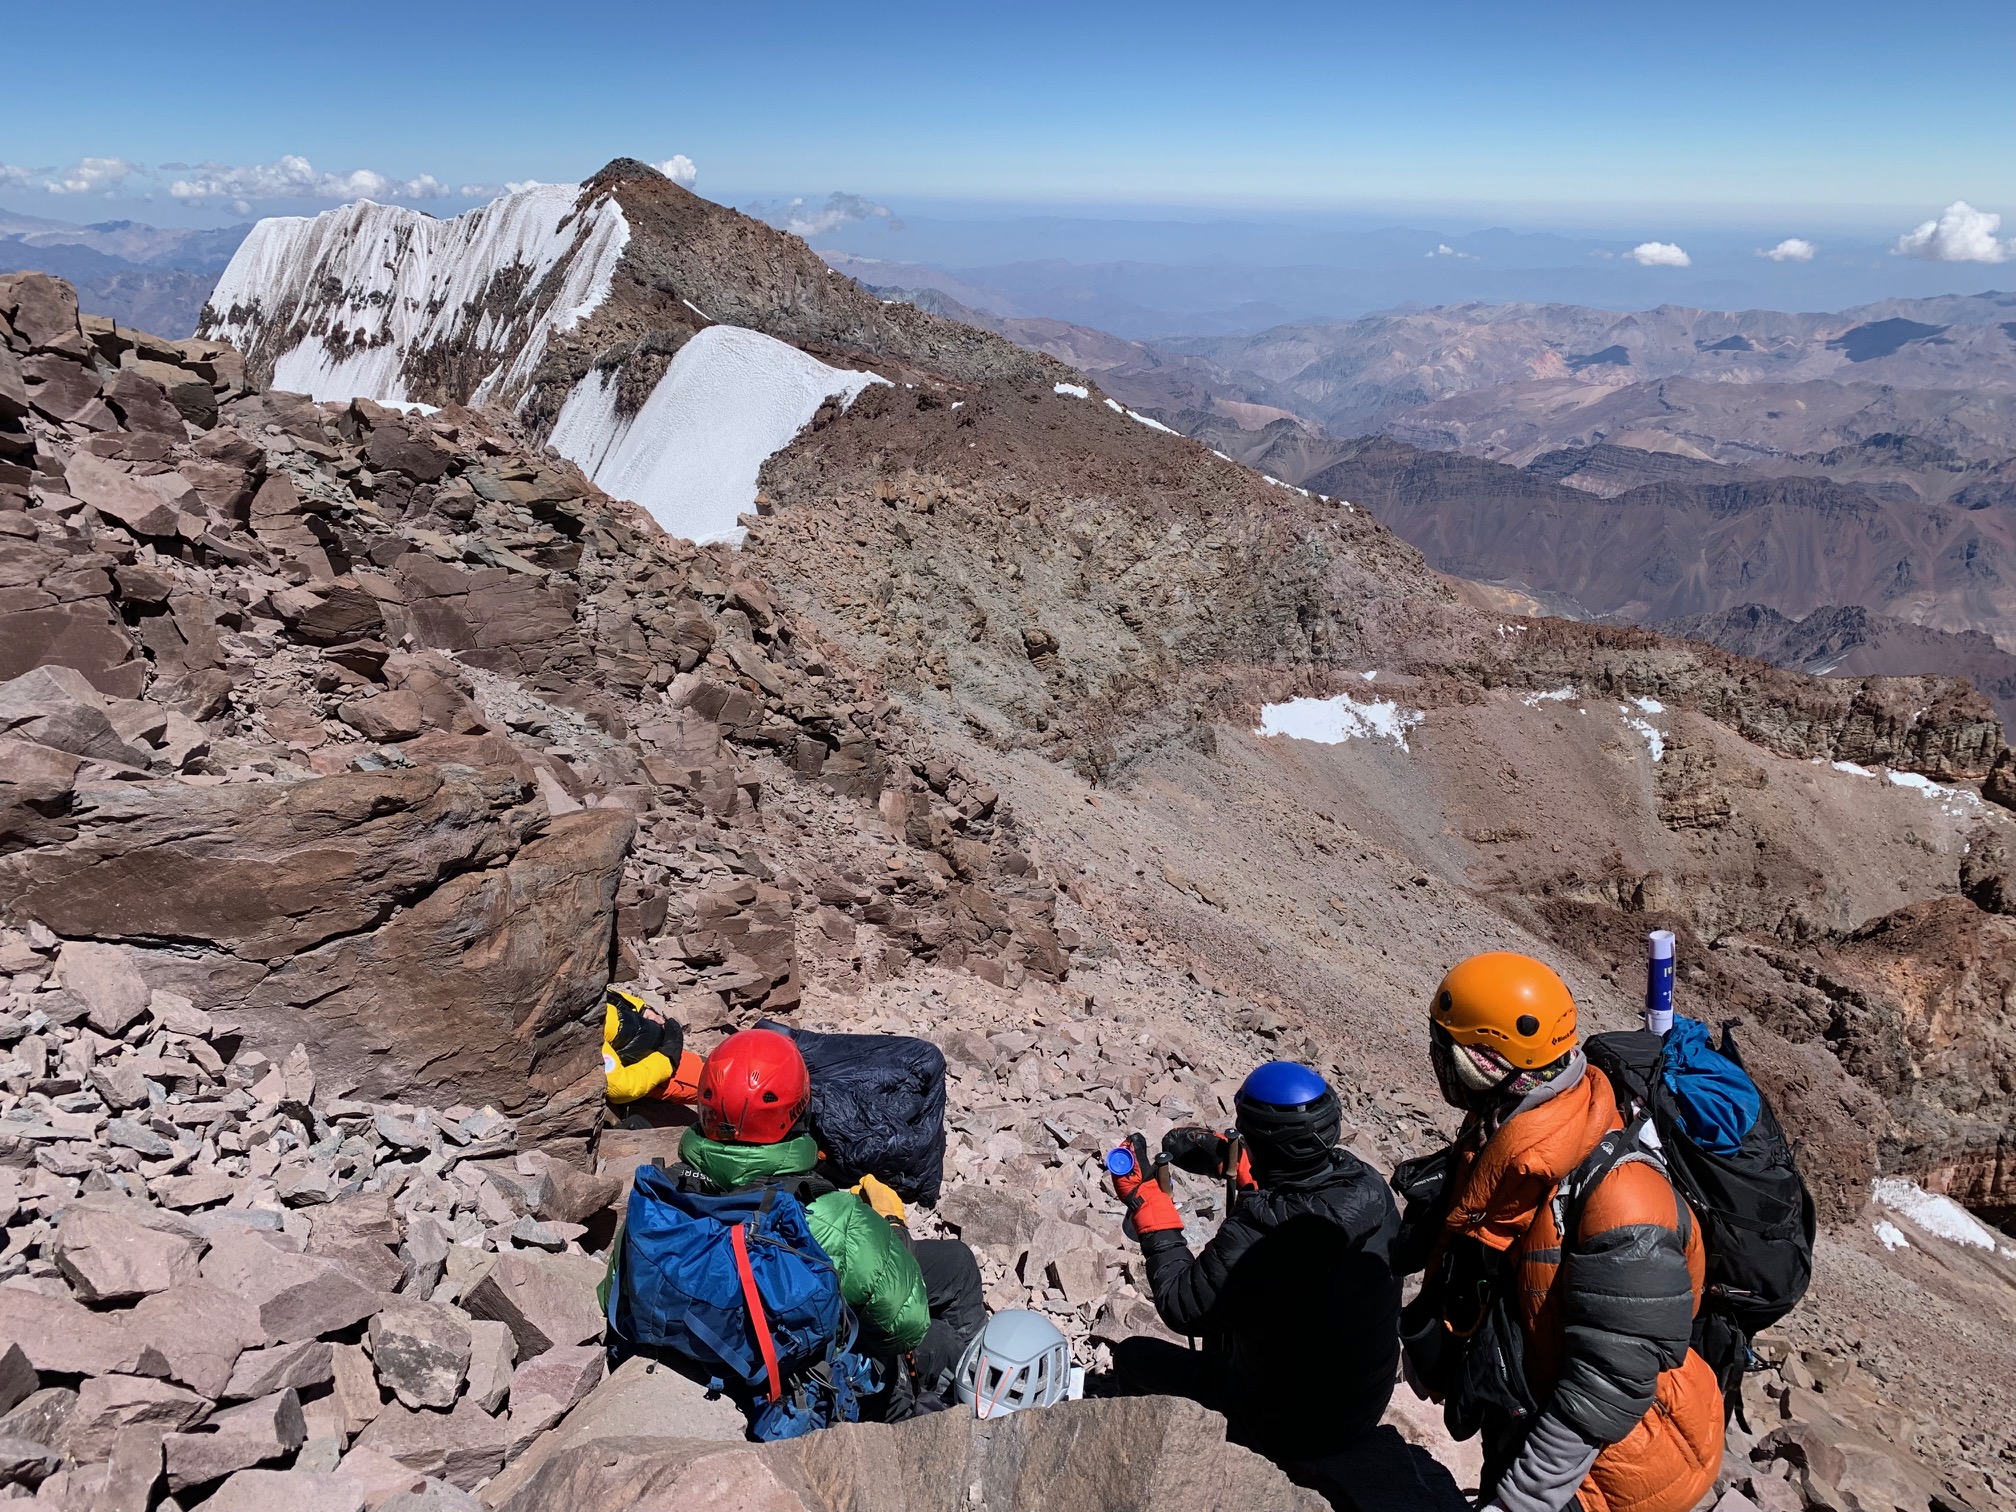 Packing for your Aconcagua Expedition